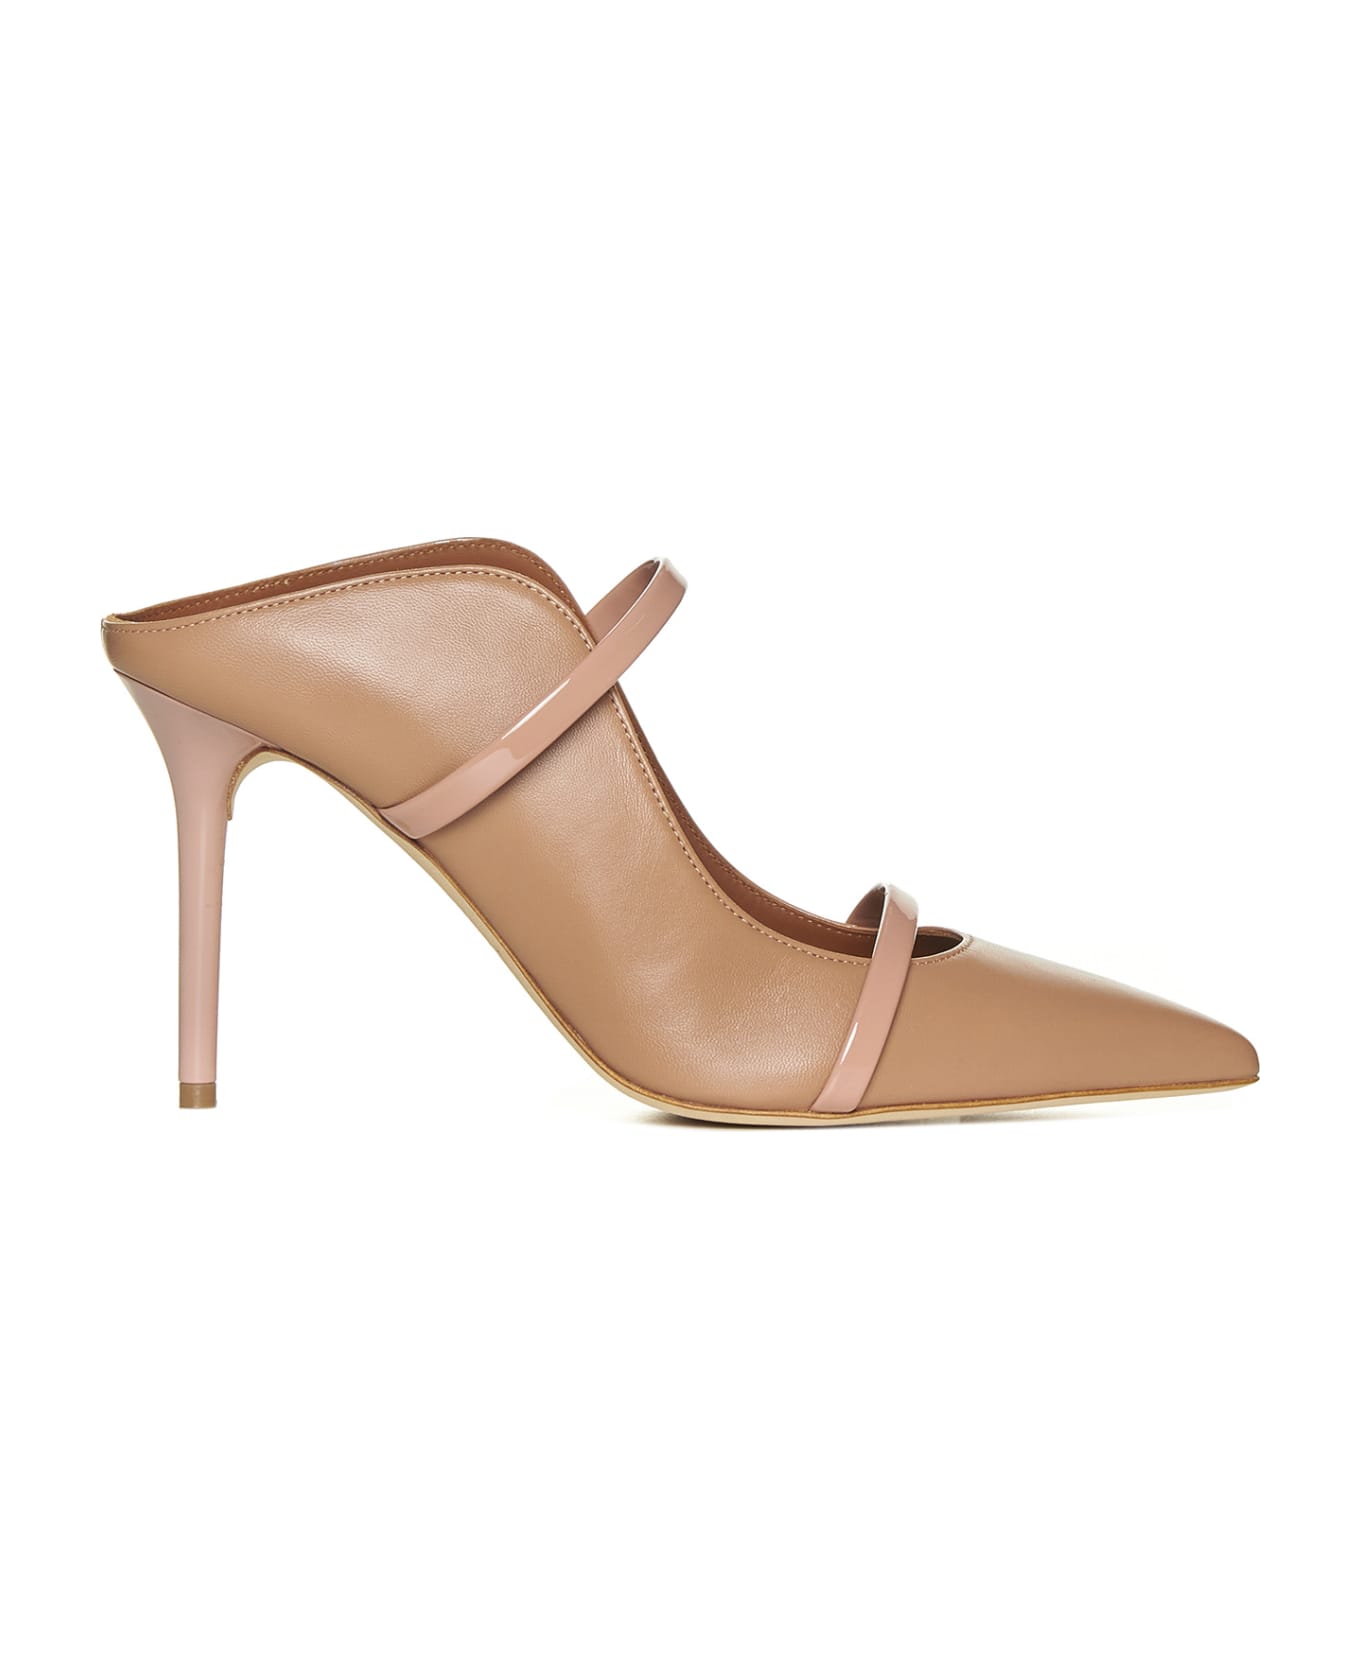 Malone Souliers Sandals - Nude/blush nud